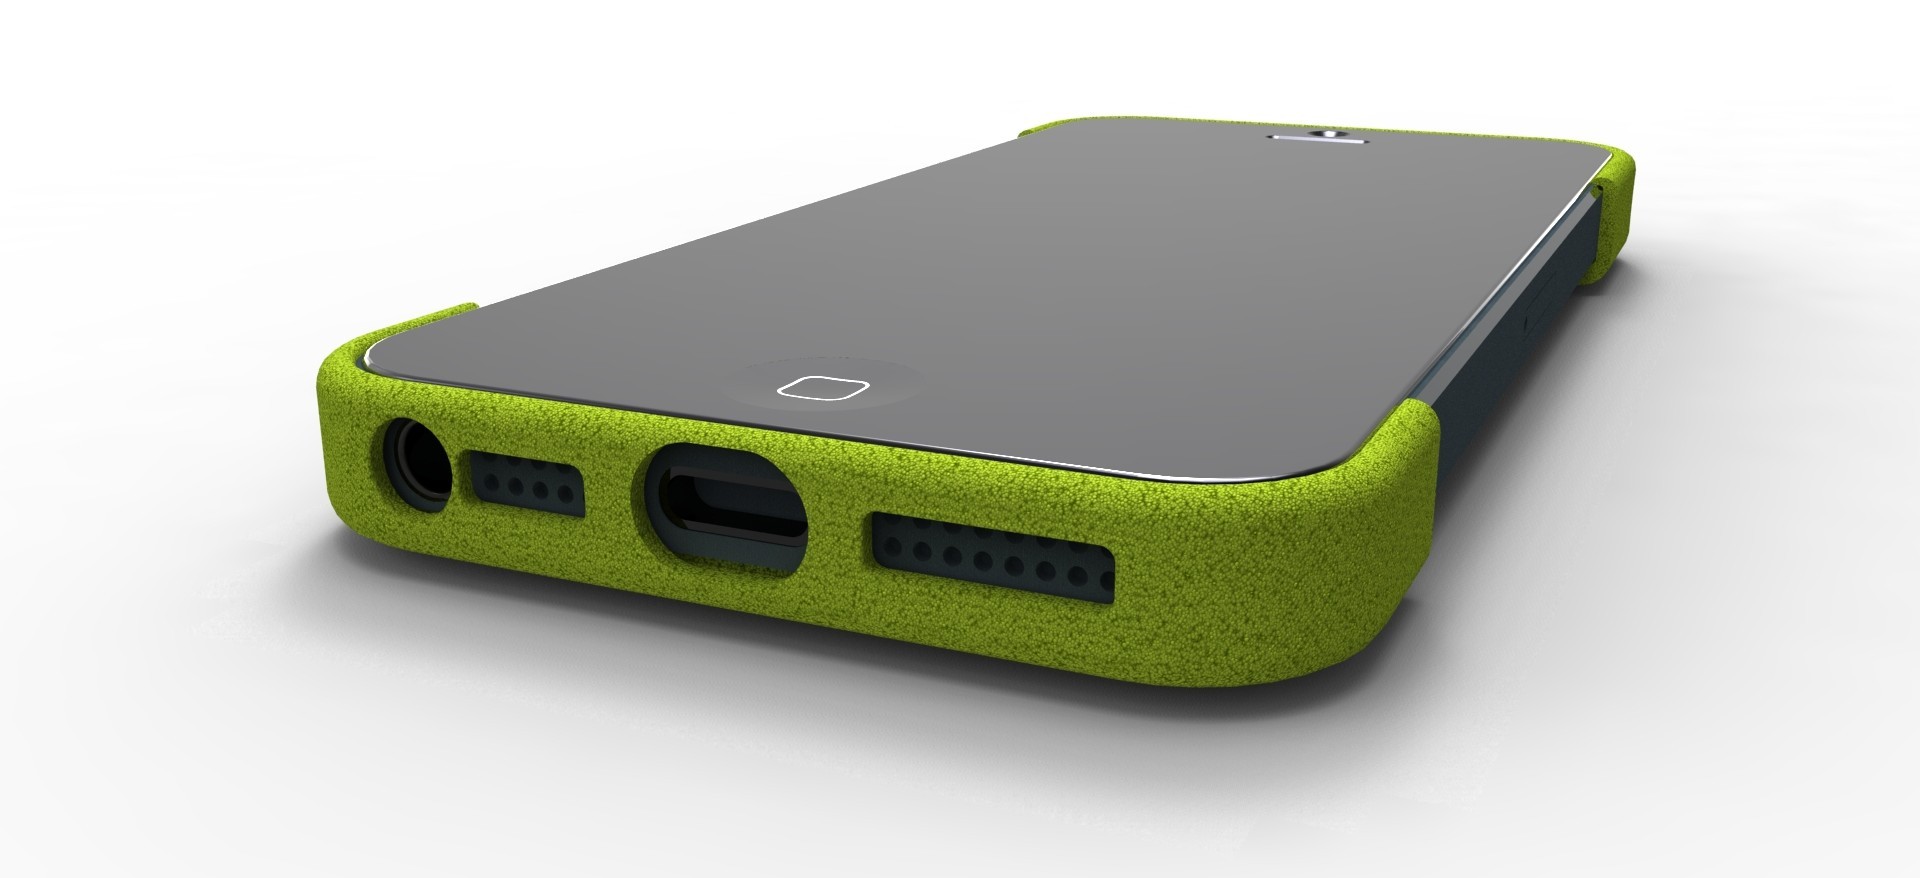 Exclusive Gallery of iPhone 5 3D Printed Cases: Get Yours Today on 3DPcase | Sculpteo Blog